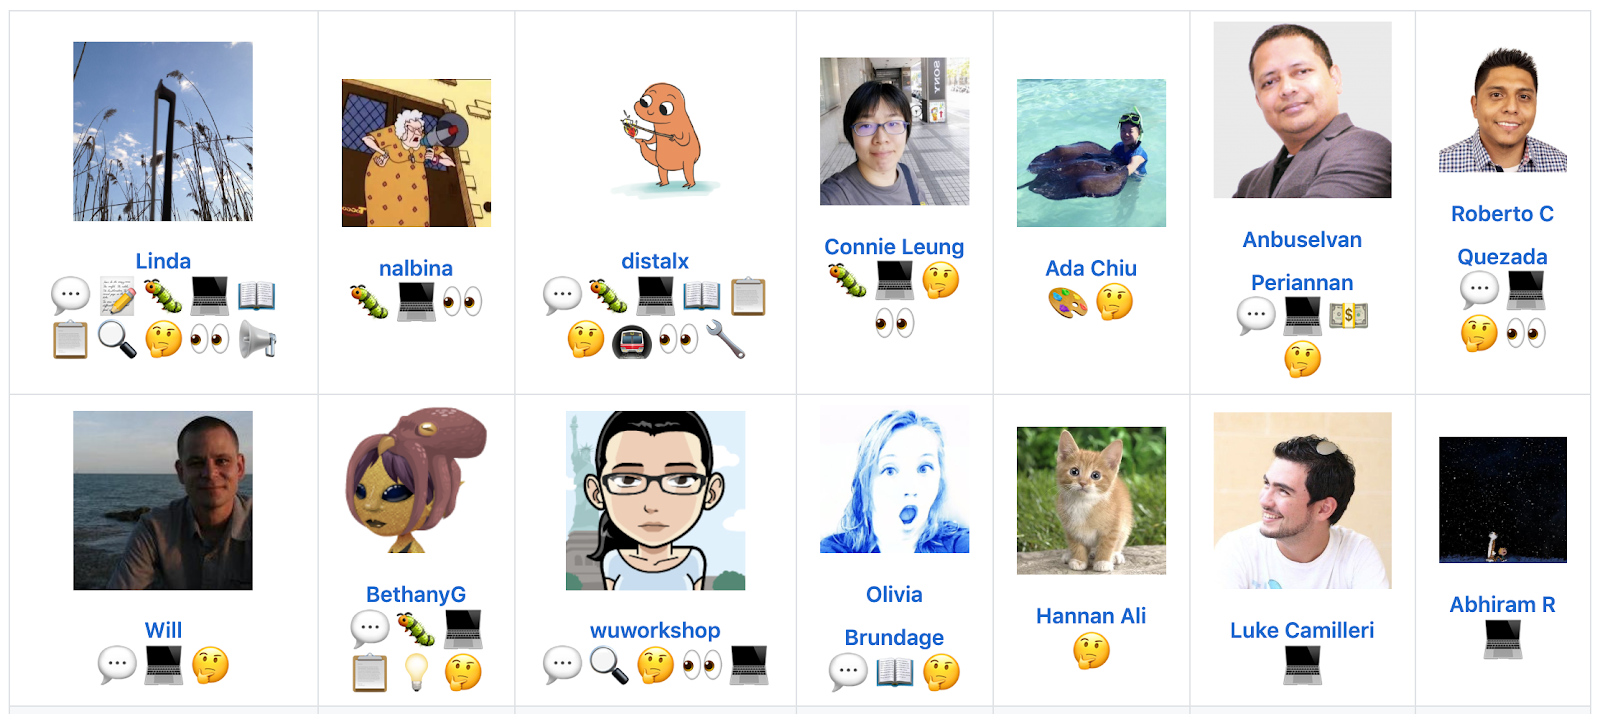 screenshot of the All Contributors attribution on the CodeBuddies.org. It shows a grid of GitHub avatars and usernames, with icons near each to reflect that person&#39;s contribution following the All Contributors spec.